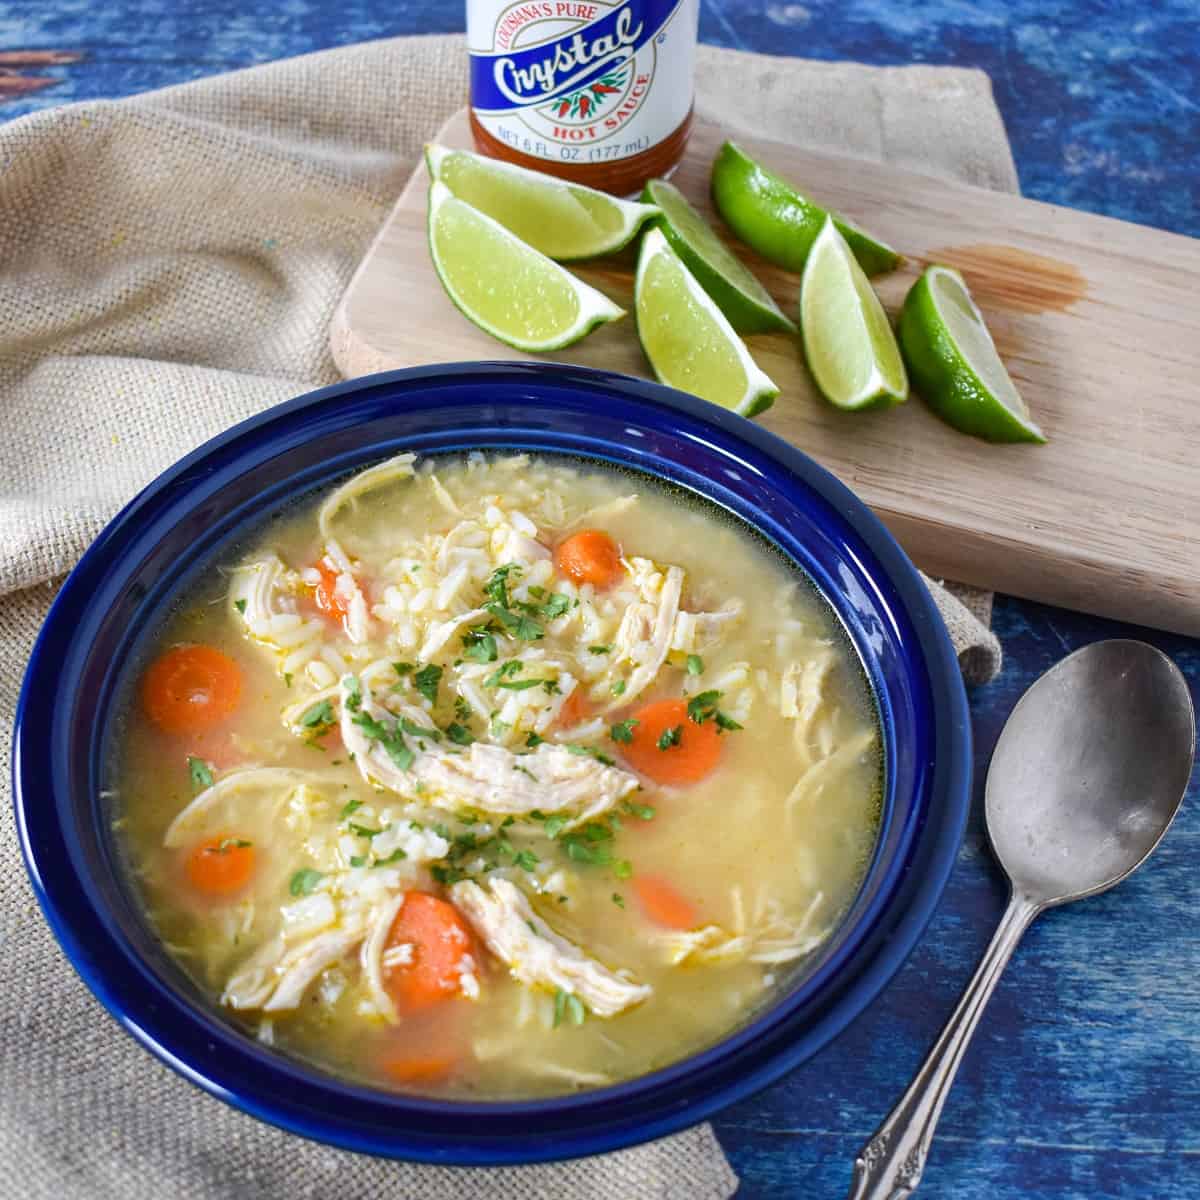 https://www.cook2eatwell.com/wp-content/uploads/2020/10/chicken-and-rice-soup-3.jpg